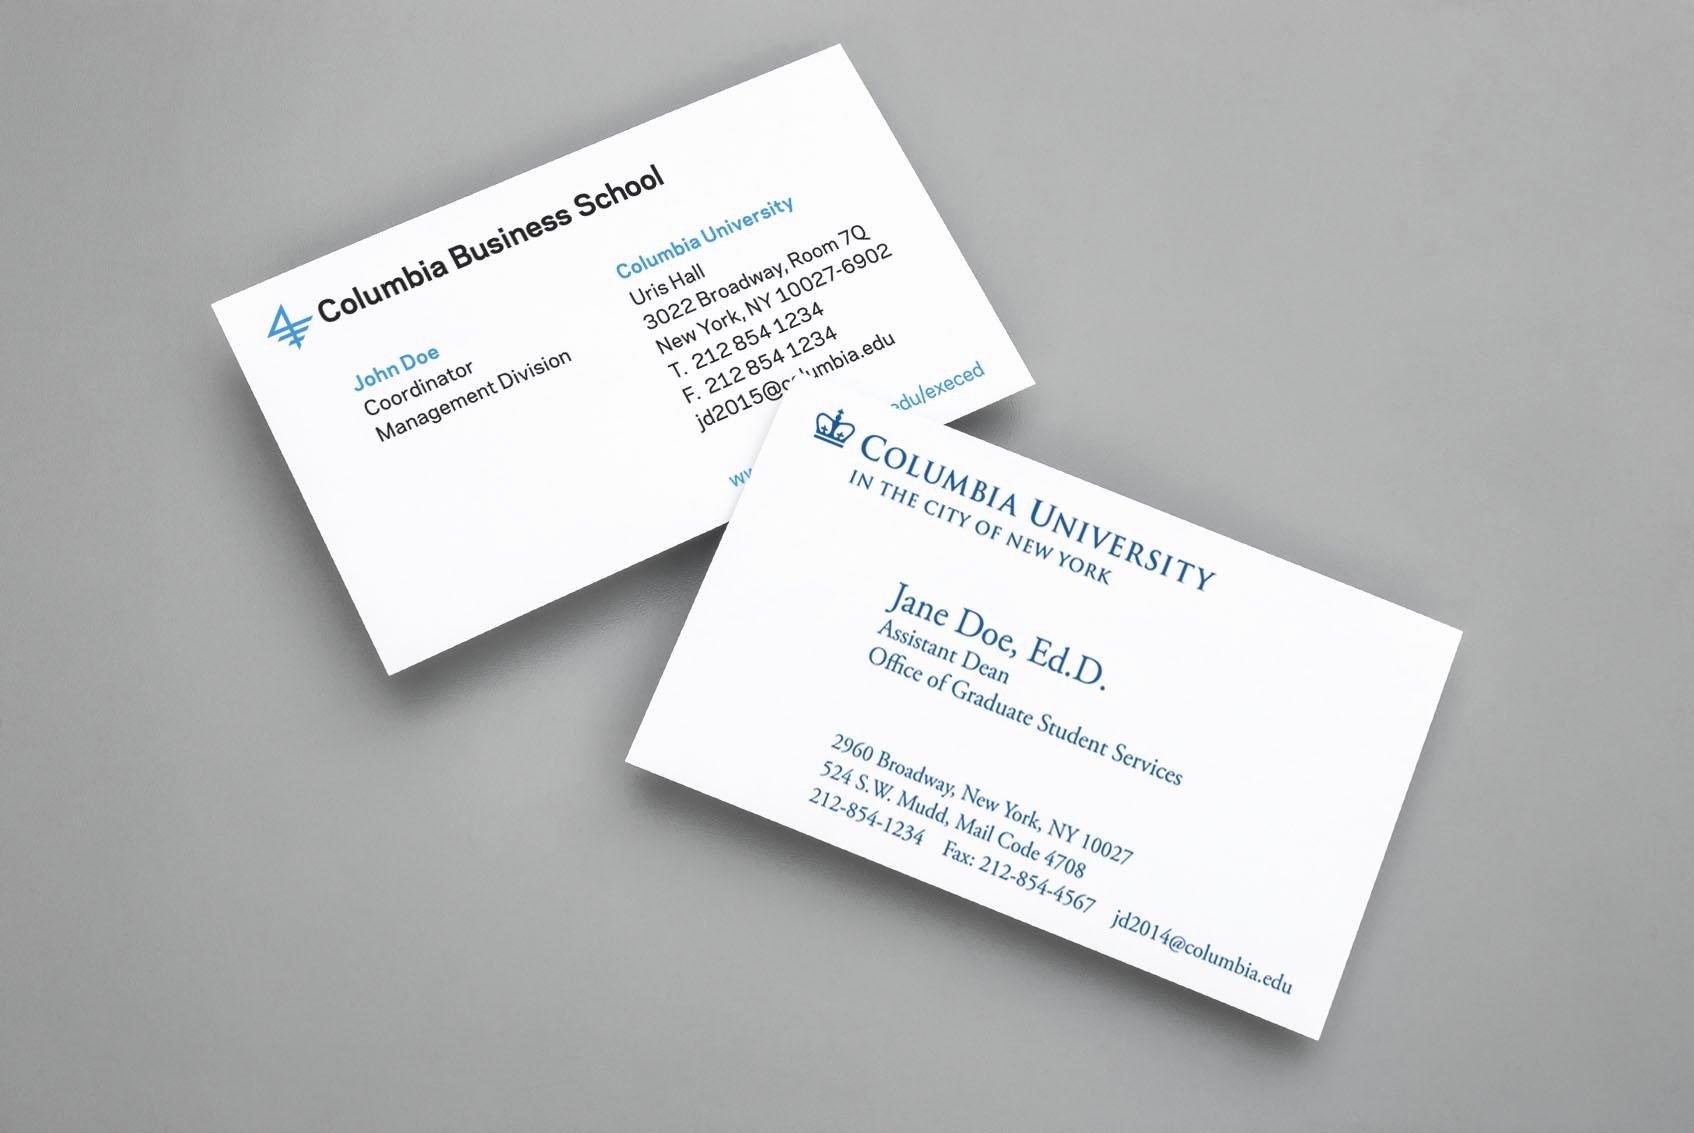 Student Business Card Examples Unique Student Business Card Sample